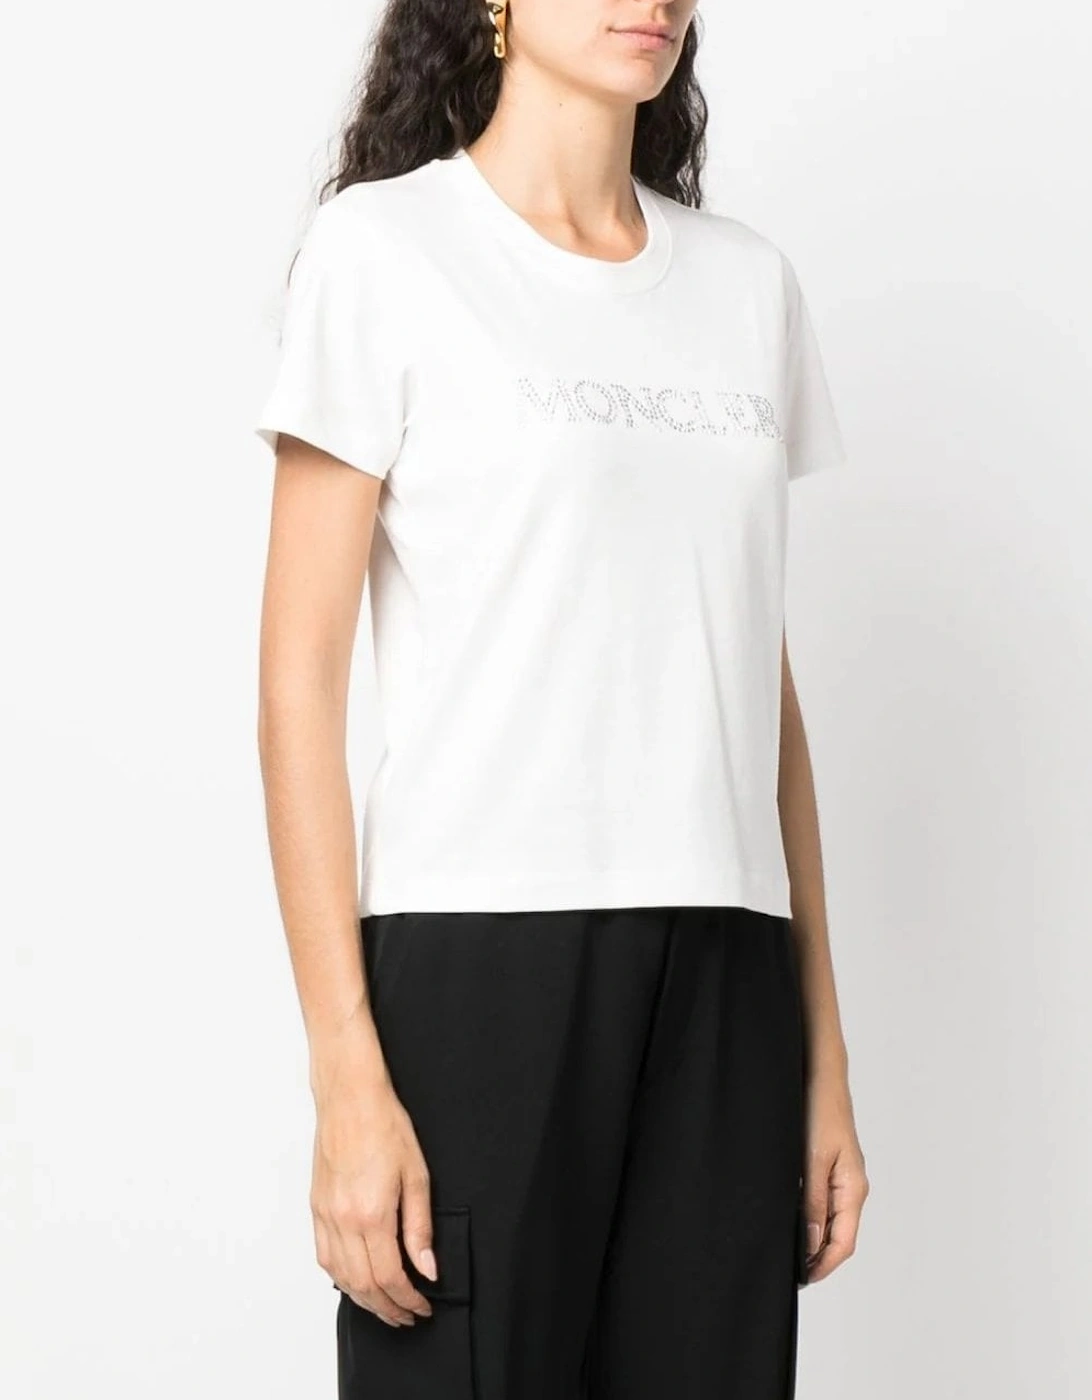 Womens Branded Cotton Tee White